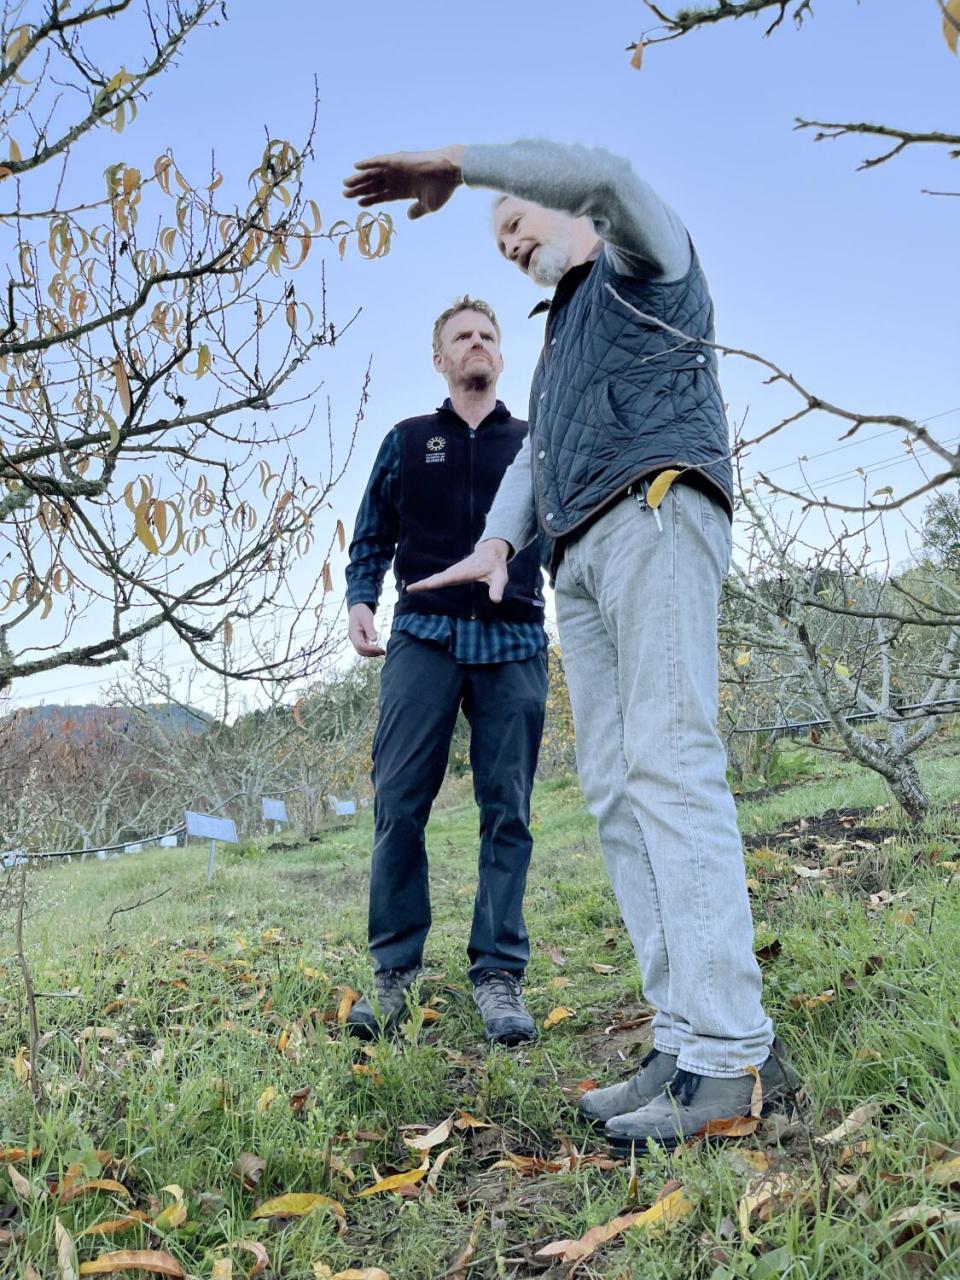 A man gestures to another man as they stand in an orchard.